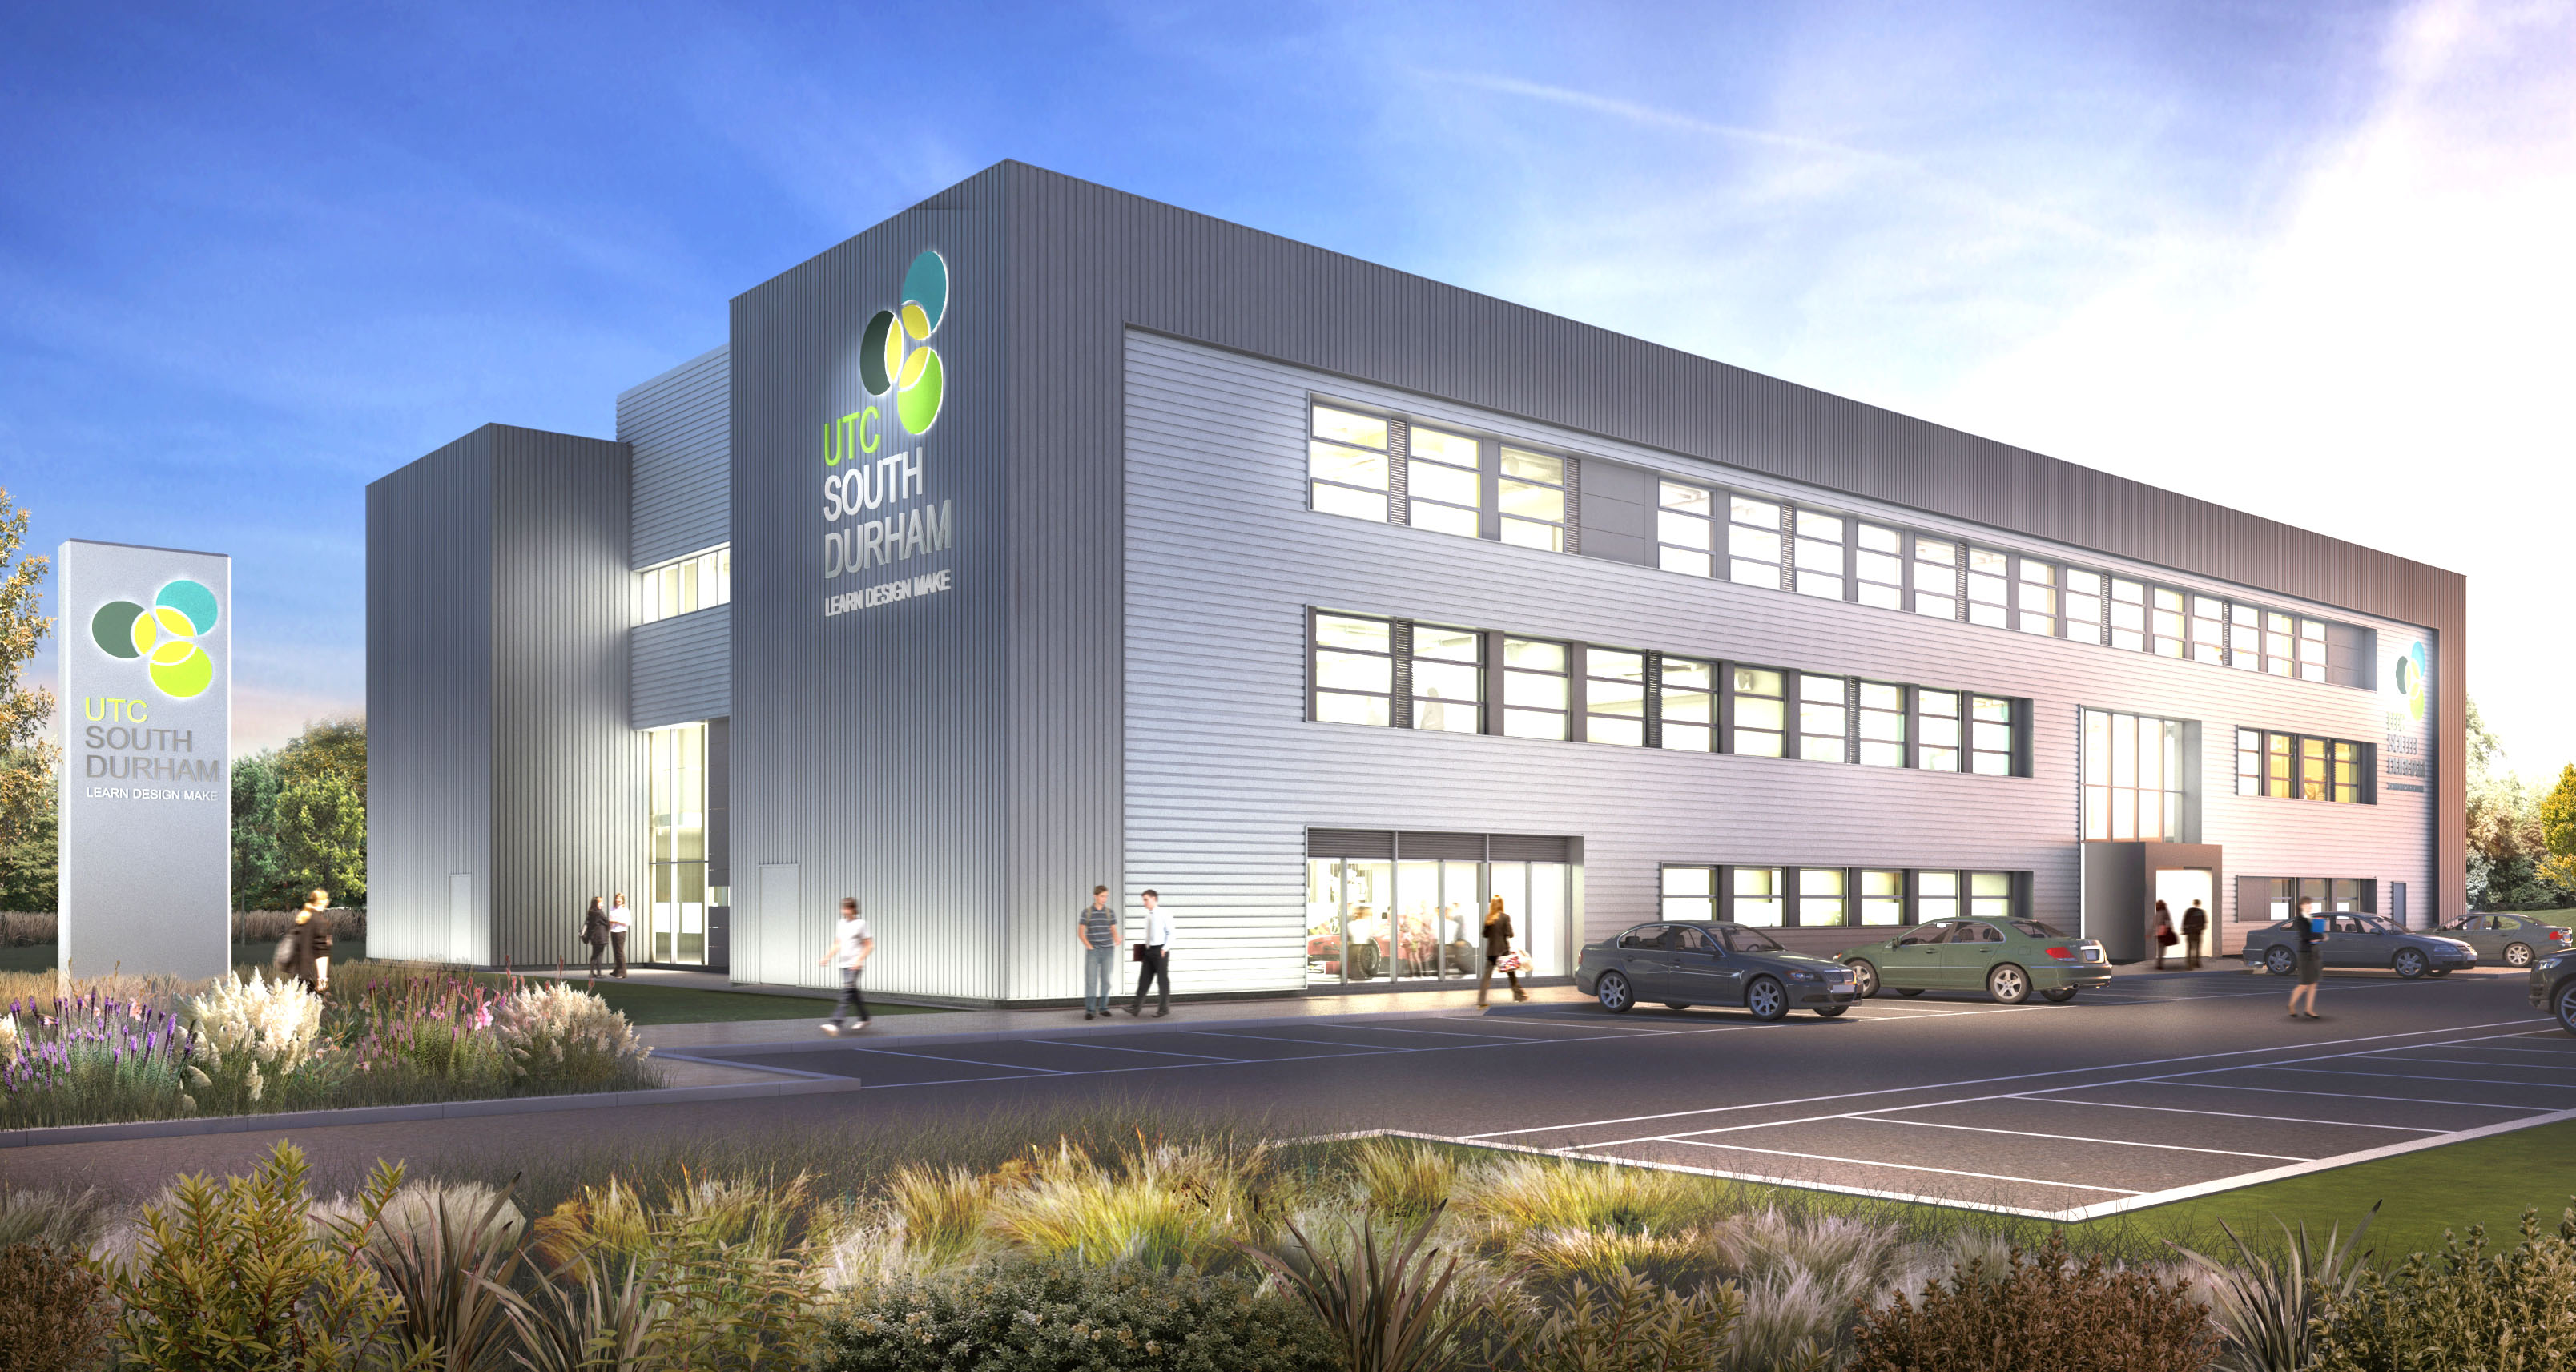 Aycliffe’s New Technical College Opens in 2016